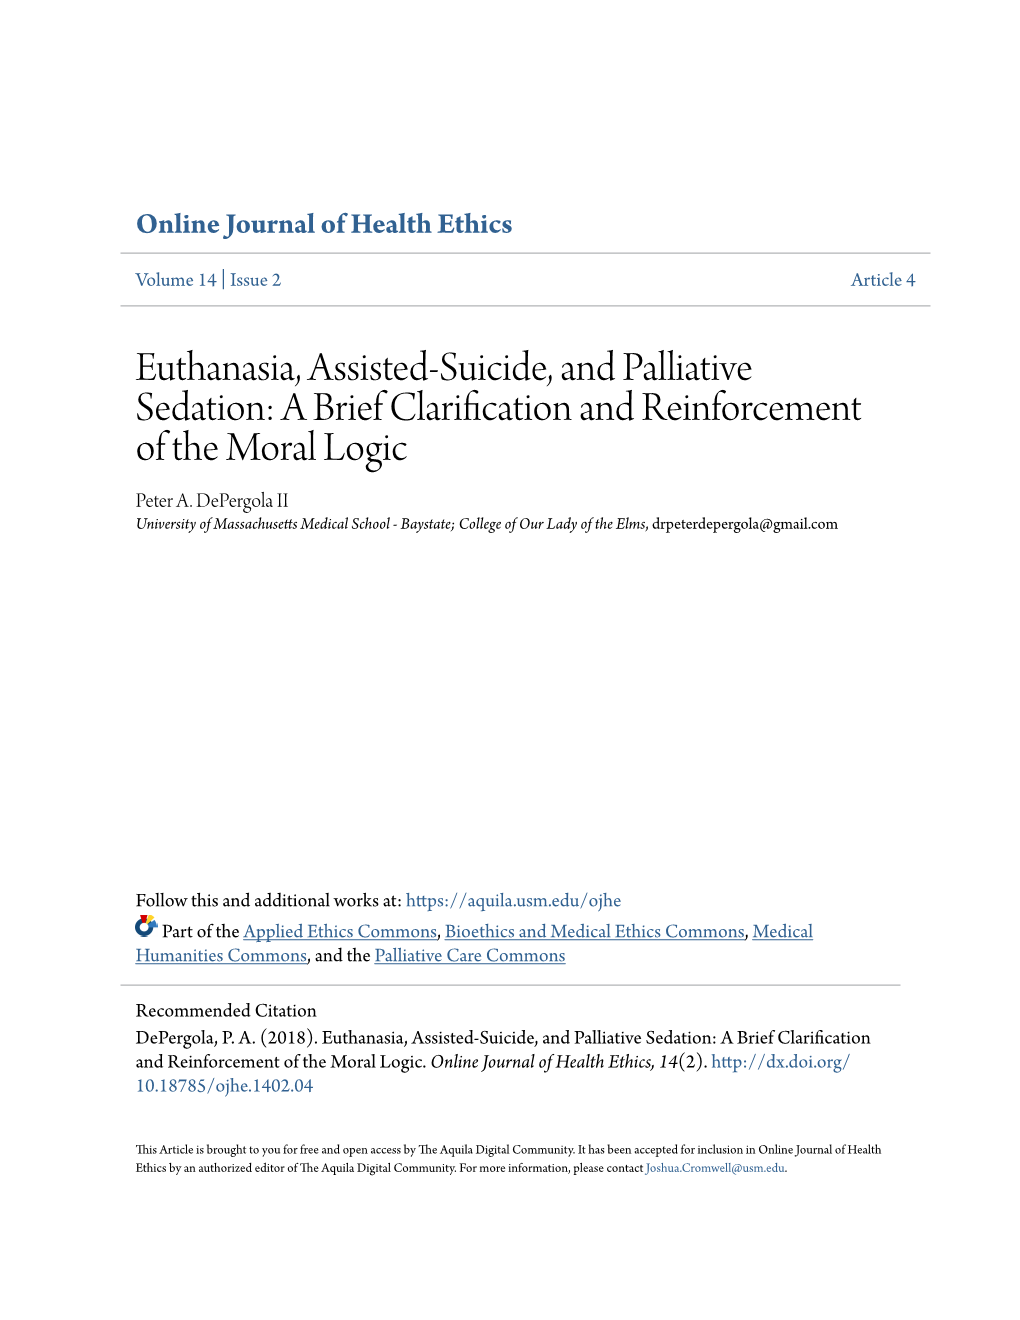 Euthanasia, Assisted-Suicide, and Palliative Sedation: a Brief Clarification and Reinforcement of the Moral Logic Peter A